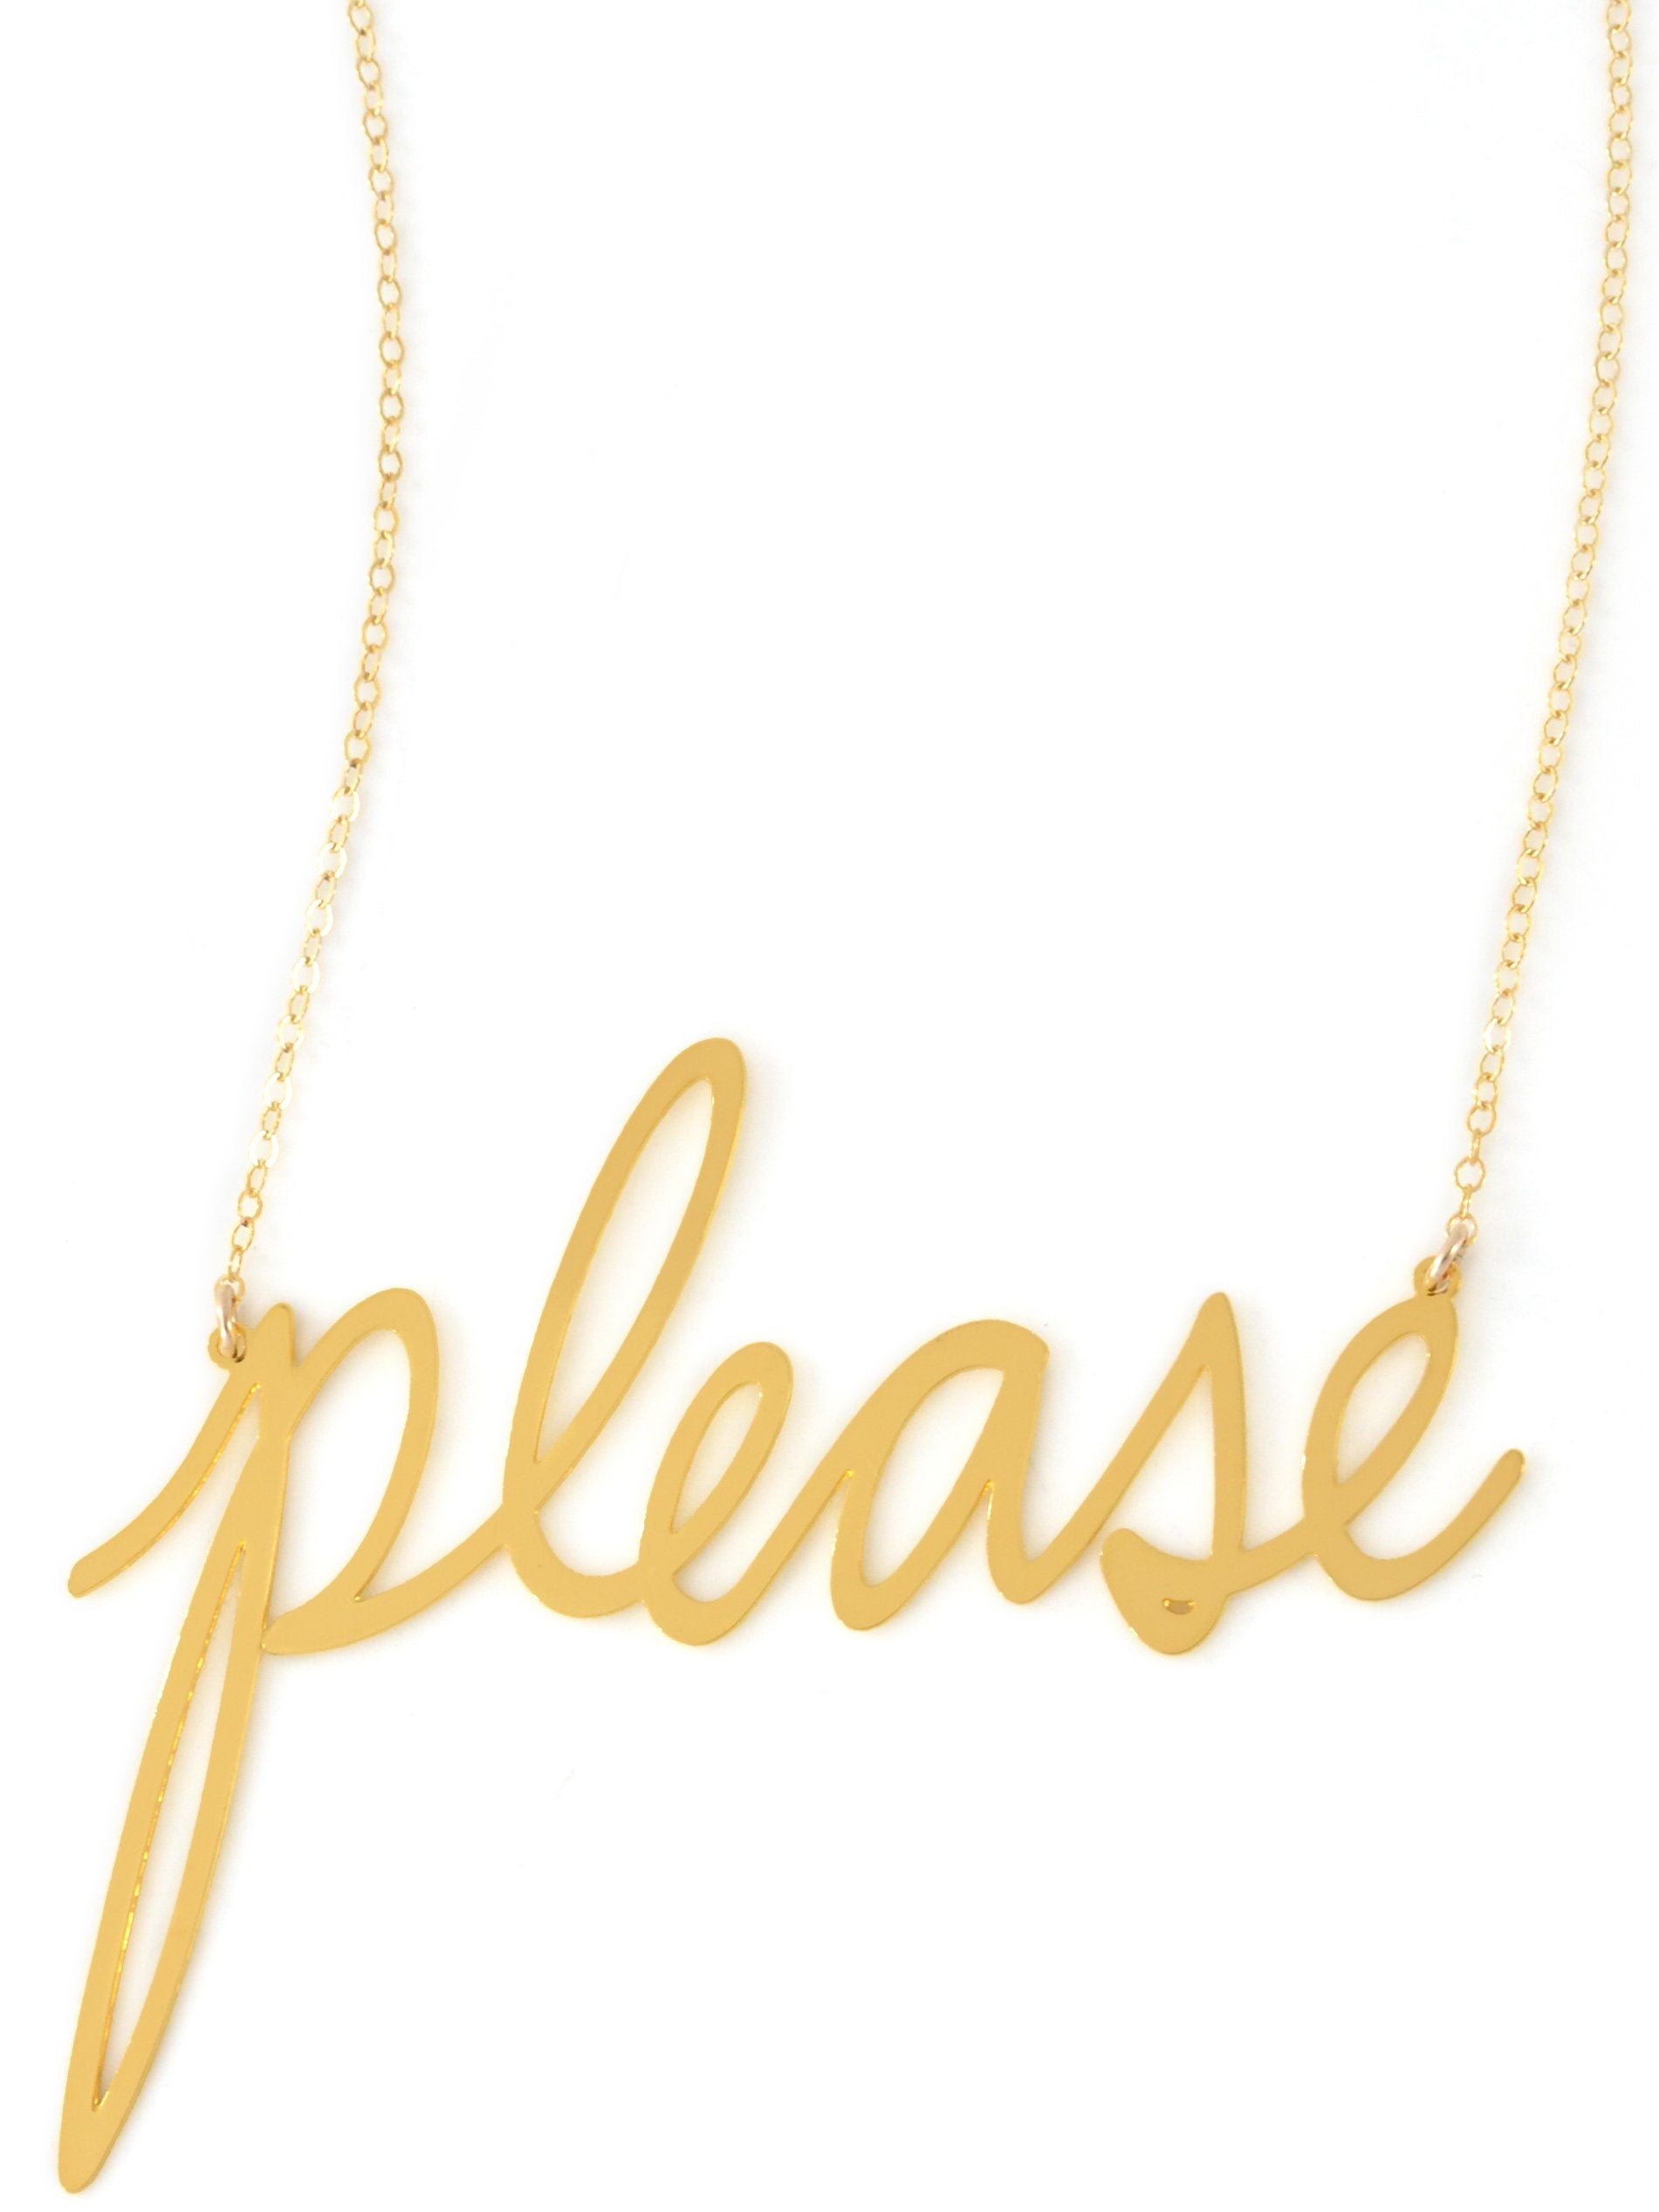 Please Necklace - High Quality, Affordable, Hand Written, Self Love, Mantra Word Necklace - Available in Gold and Silver - Small and Large Sizes - Made in USA - Brevity Jewelry